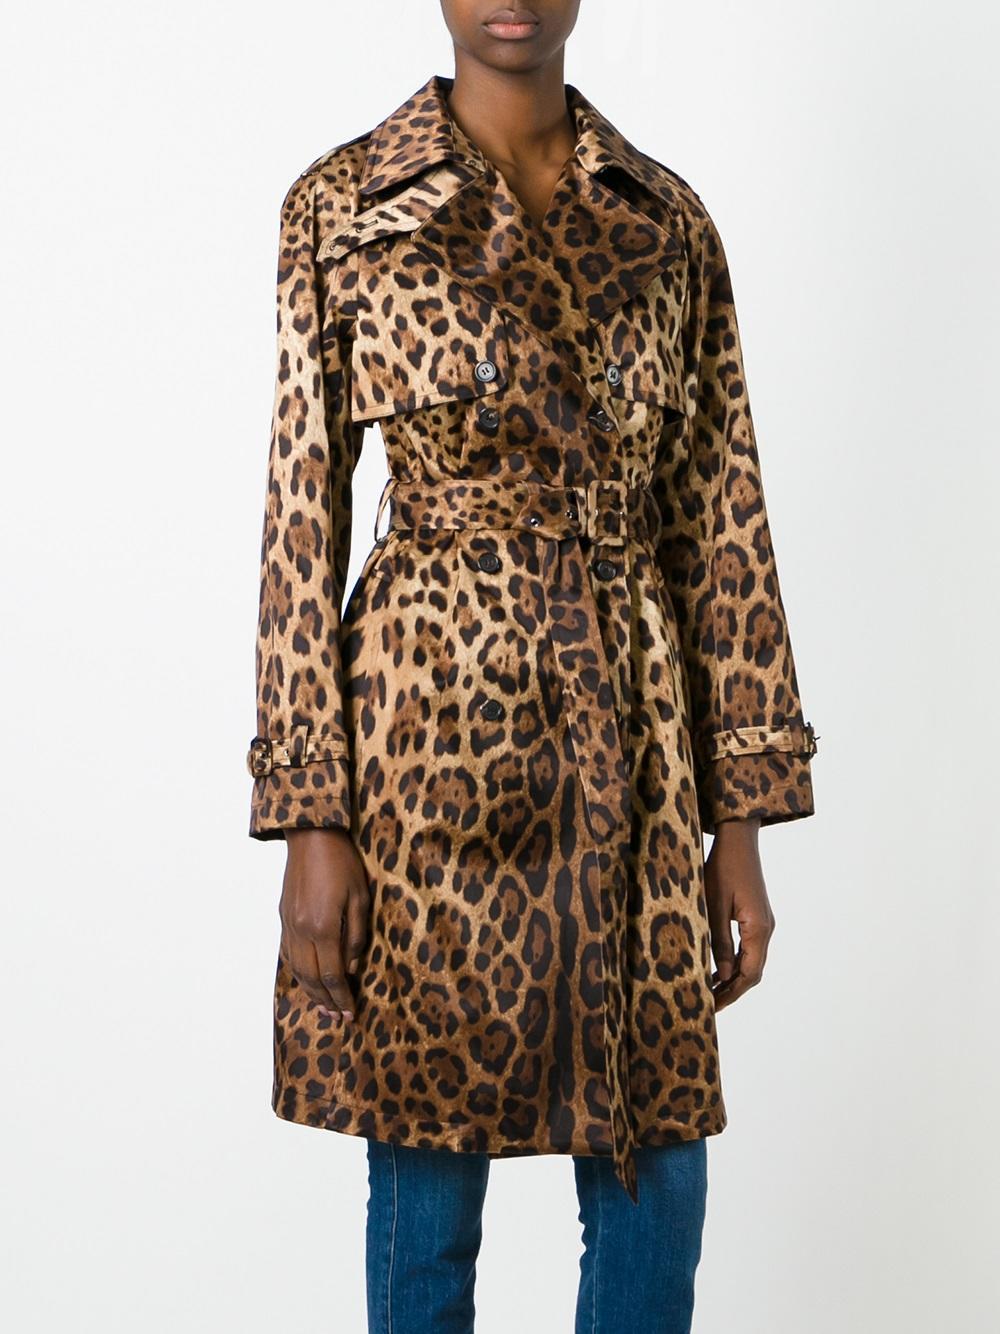 Dolce & Gabbana Leopard Print Trench Coat in Brown | Lyst